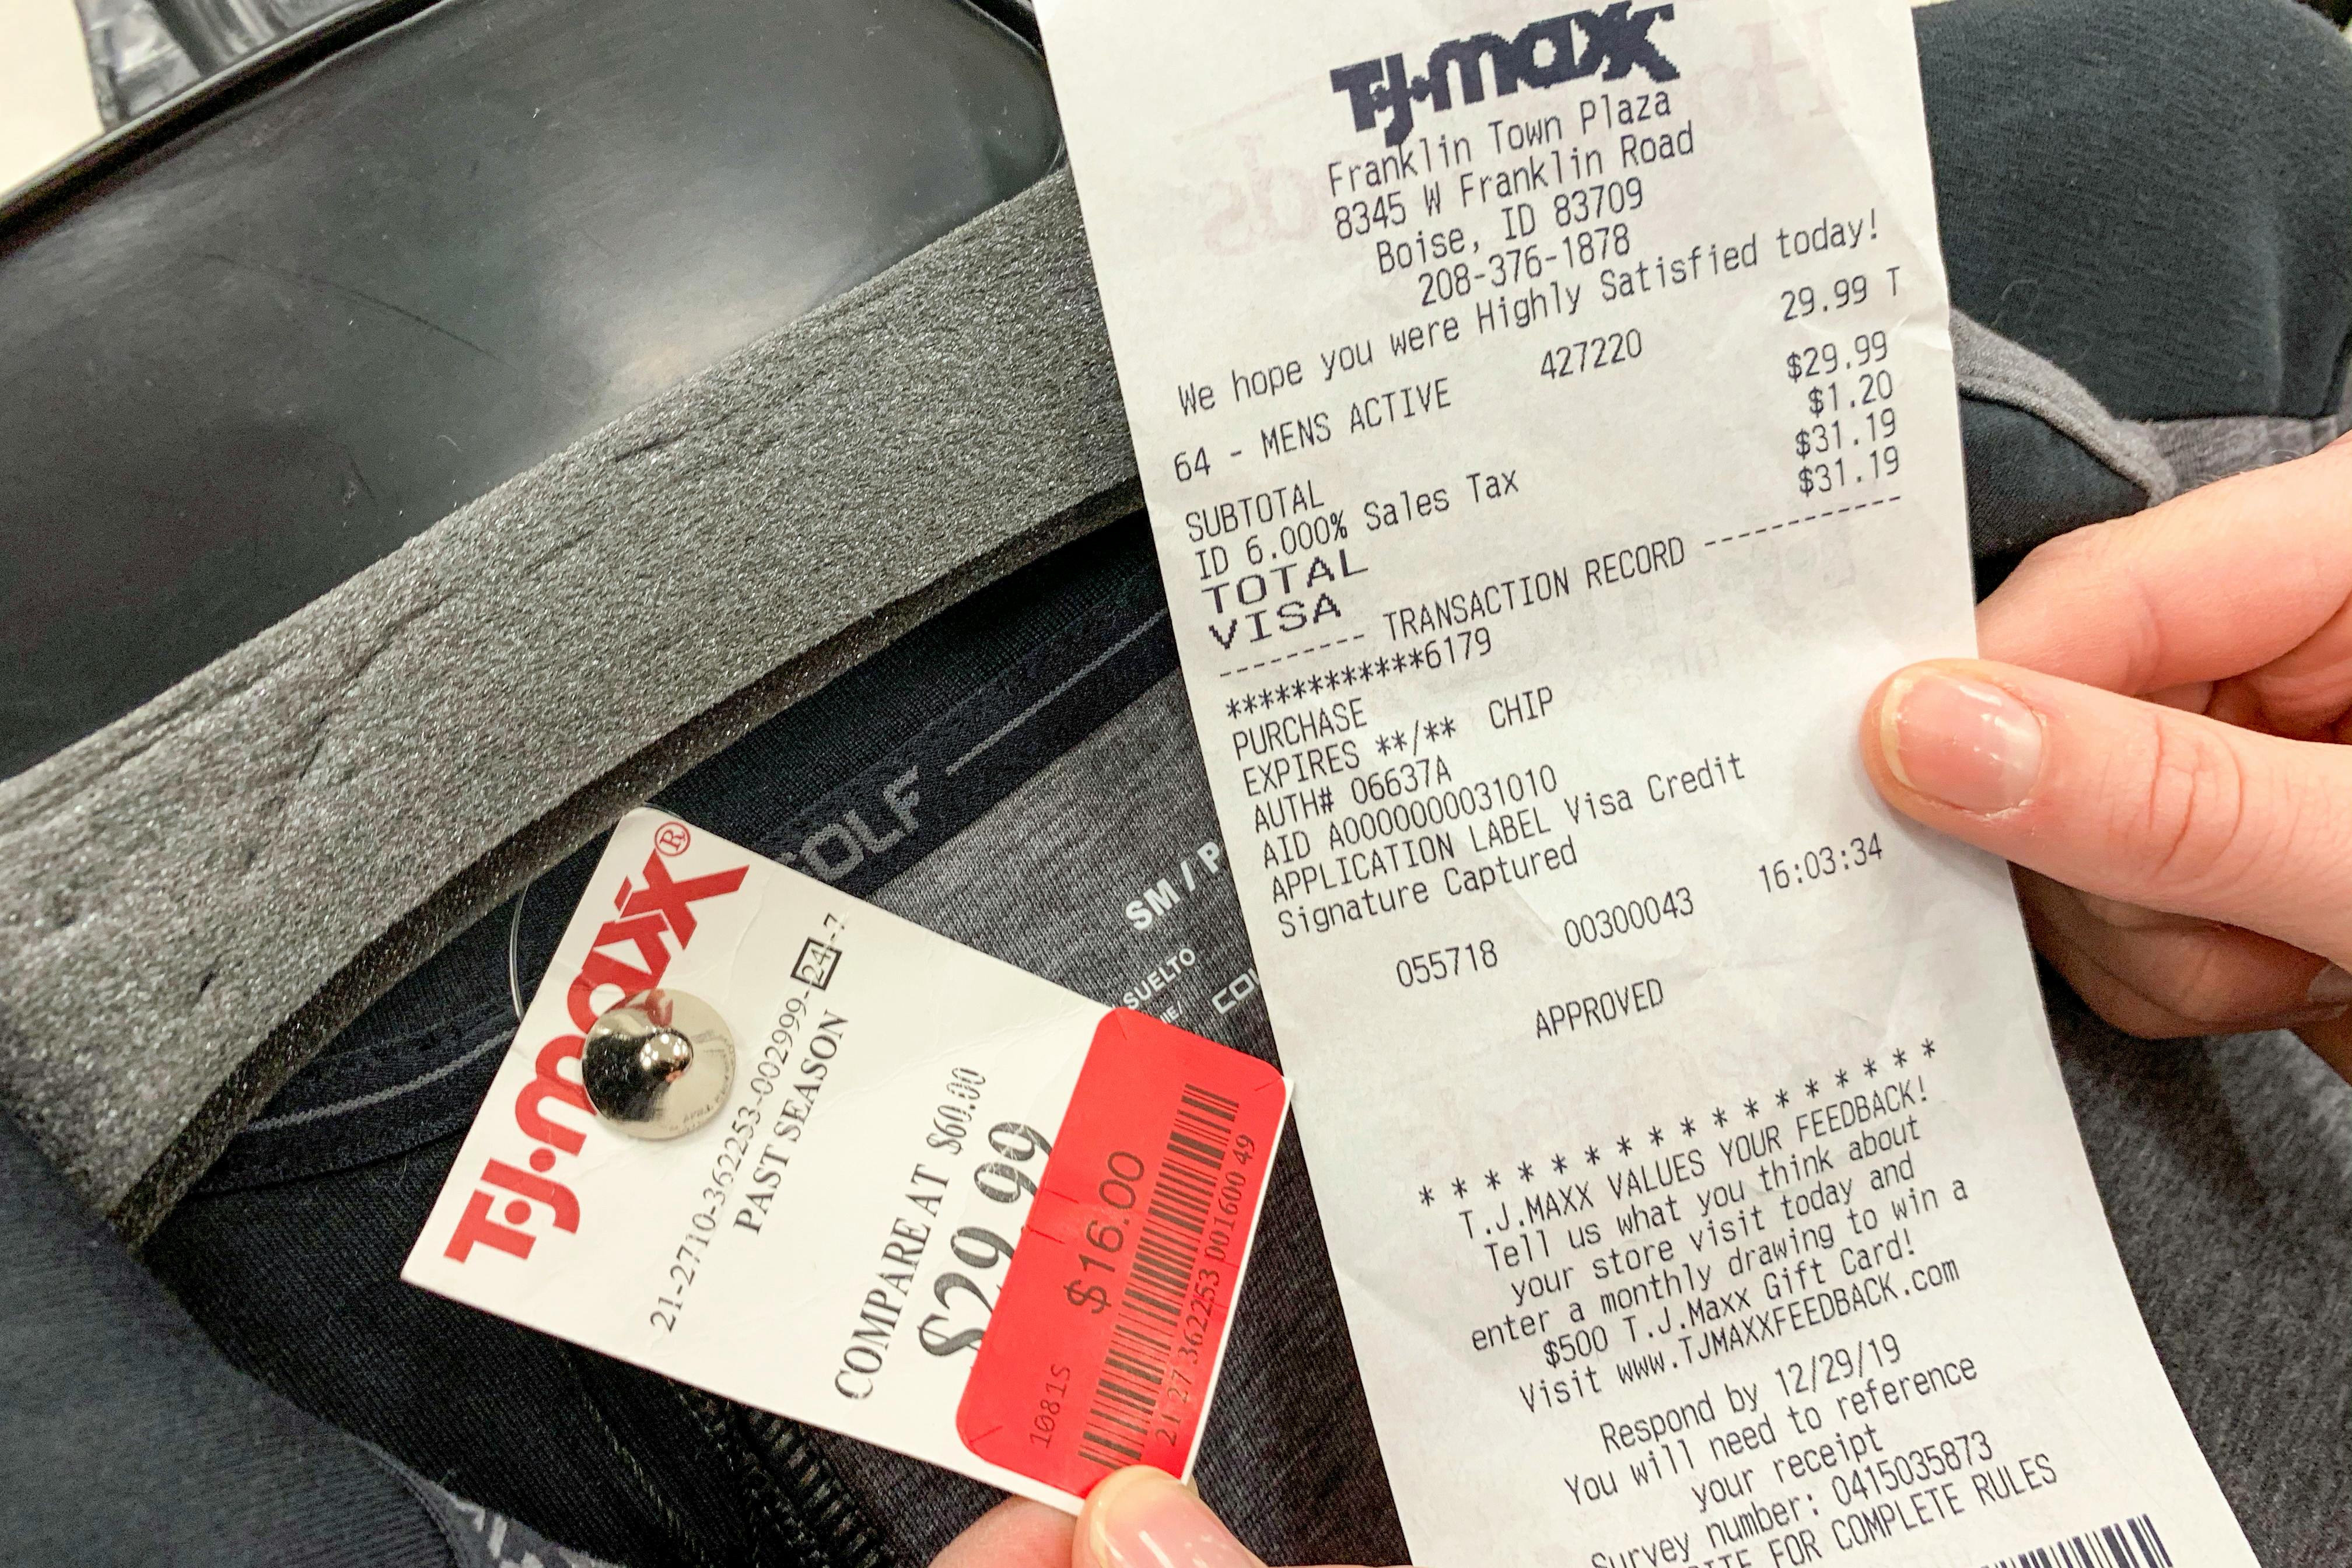 10 Things About TJ Maxx You Need to Know & Why Prices Are Cheap – Footwear  News